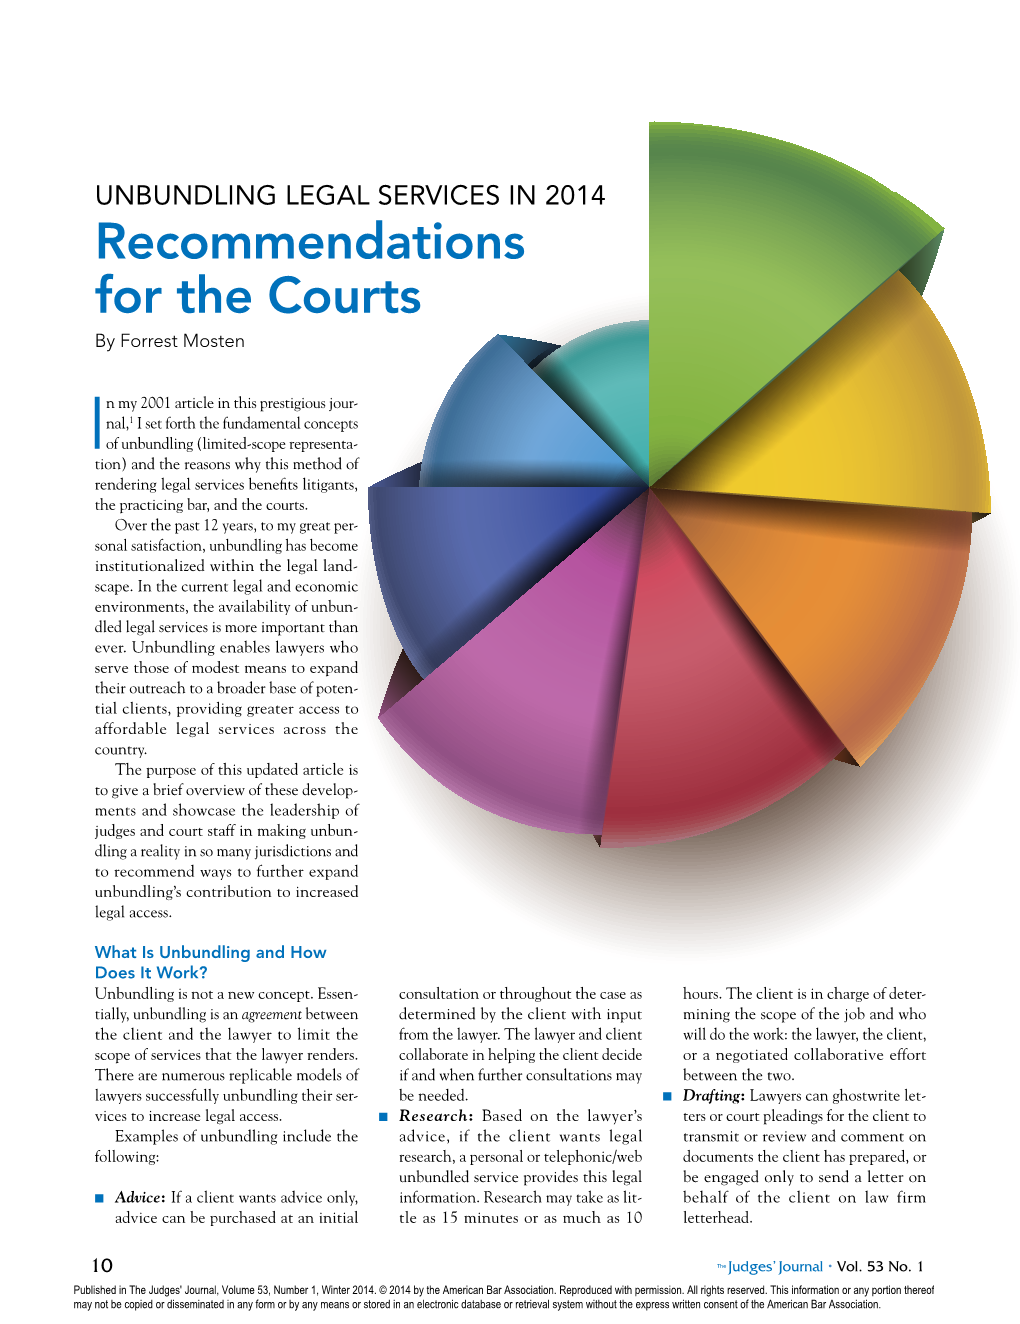 Mosten – Unbundling in 2014: Recommendations for the Courts